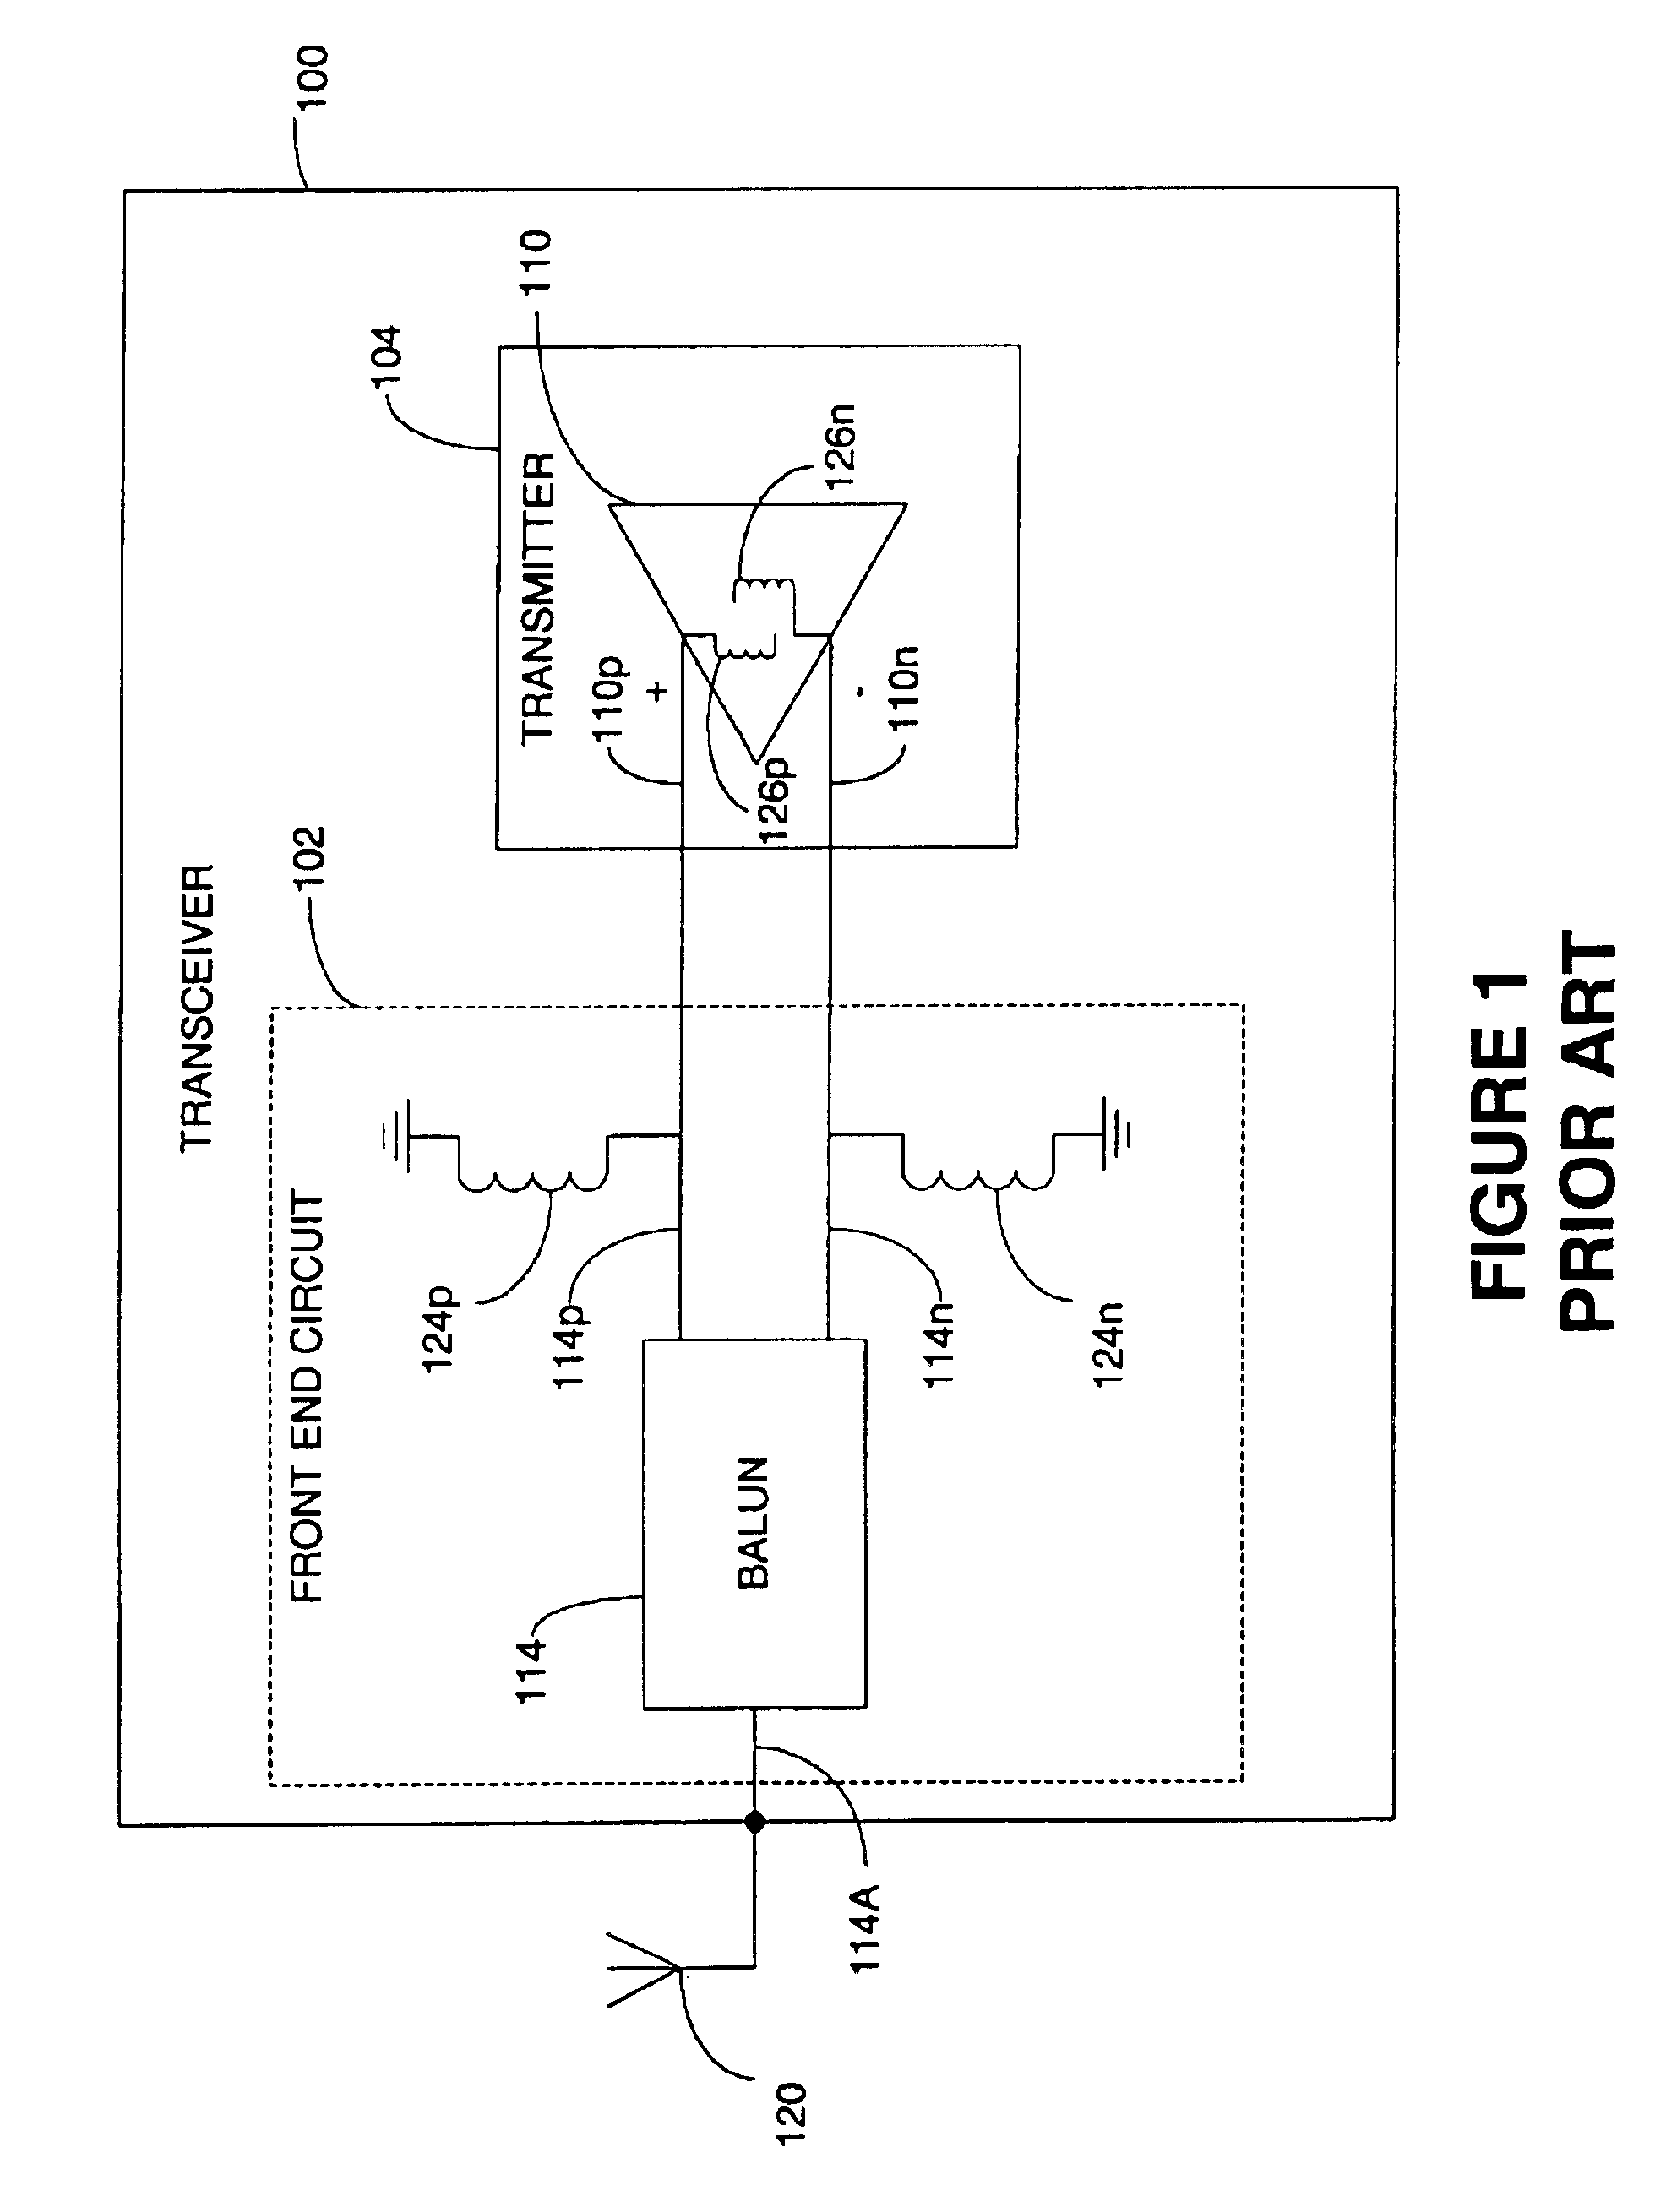 Single ended tuning of a differential power amplifier output